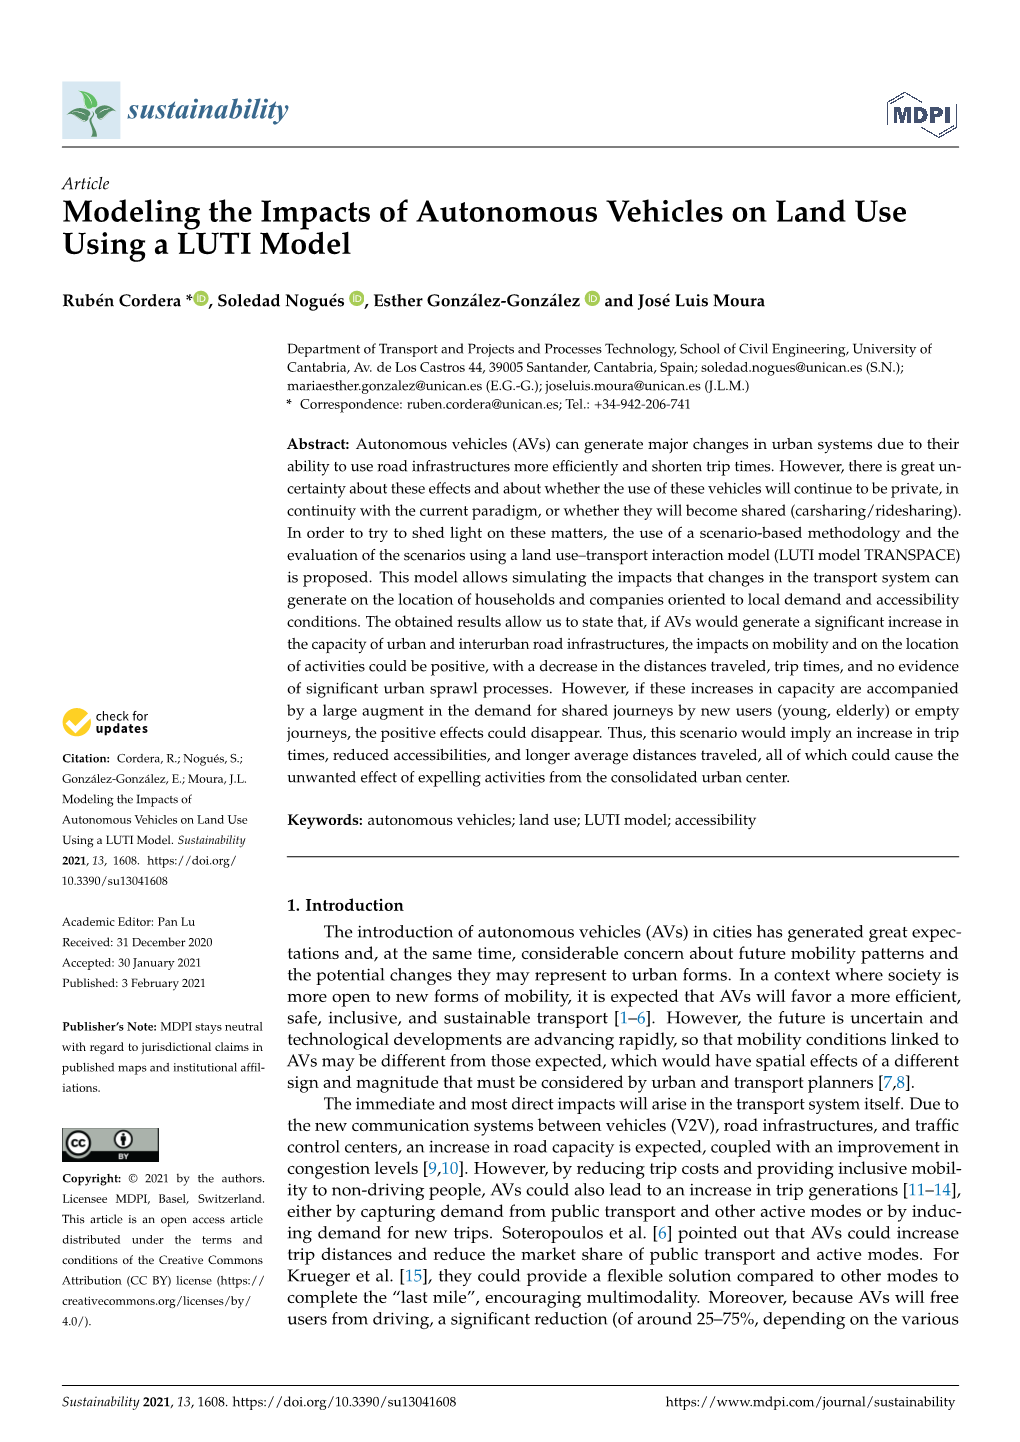 Modeling the Impacts of Autonomous Vehicles on Land Use Using a LUTI Model